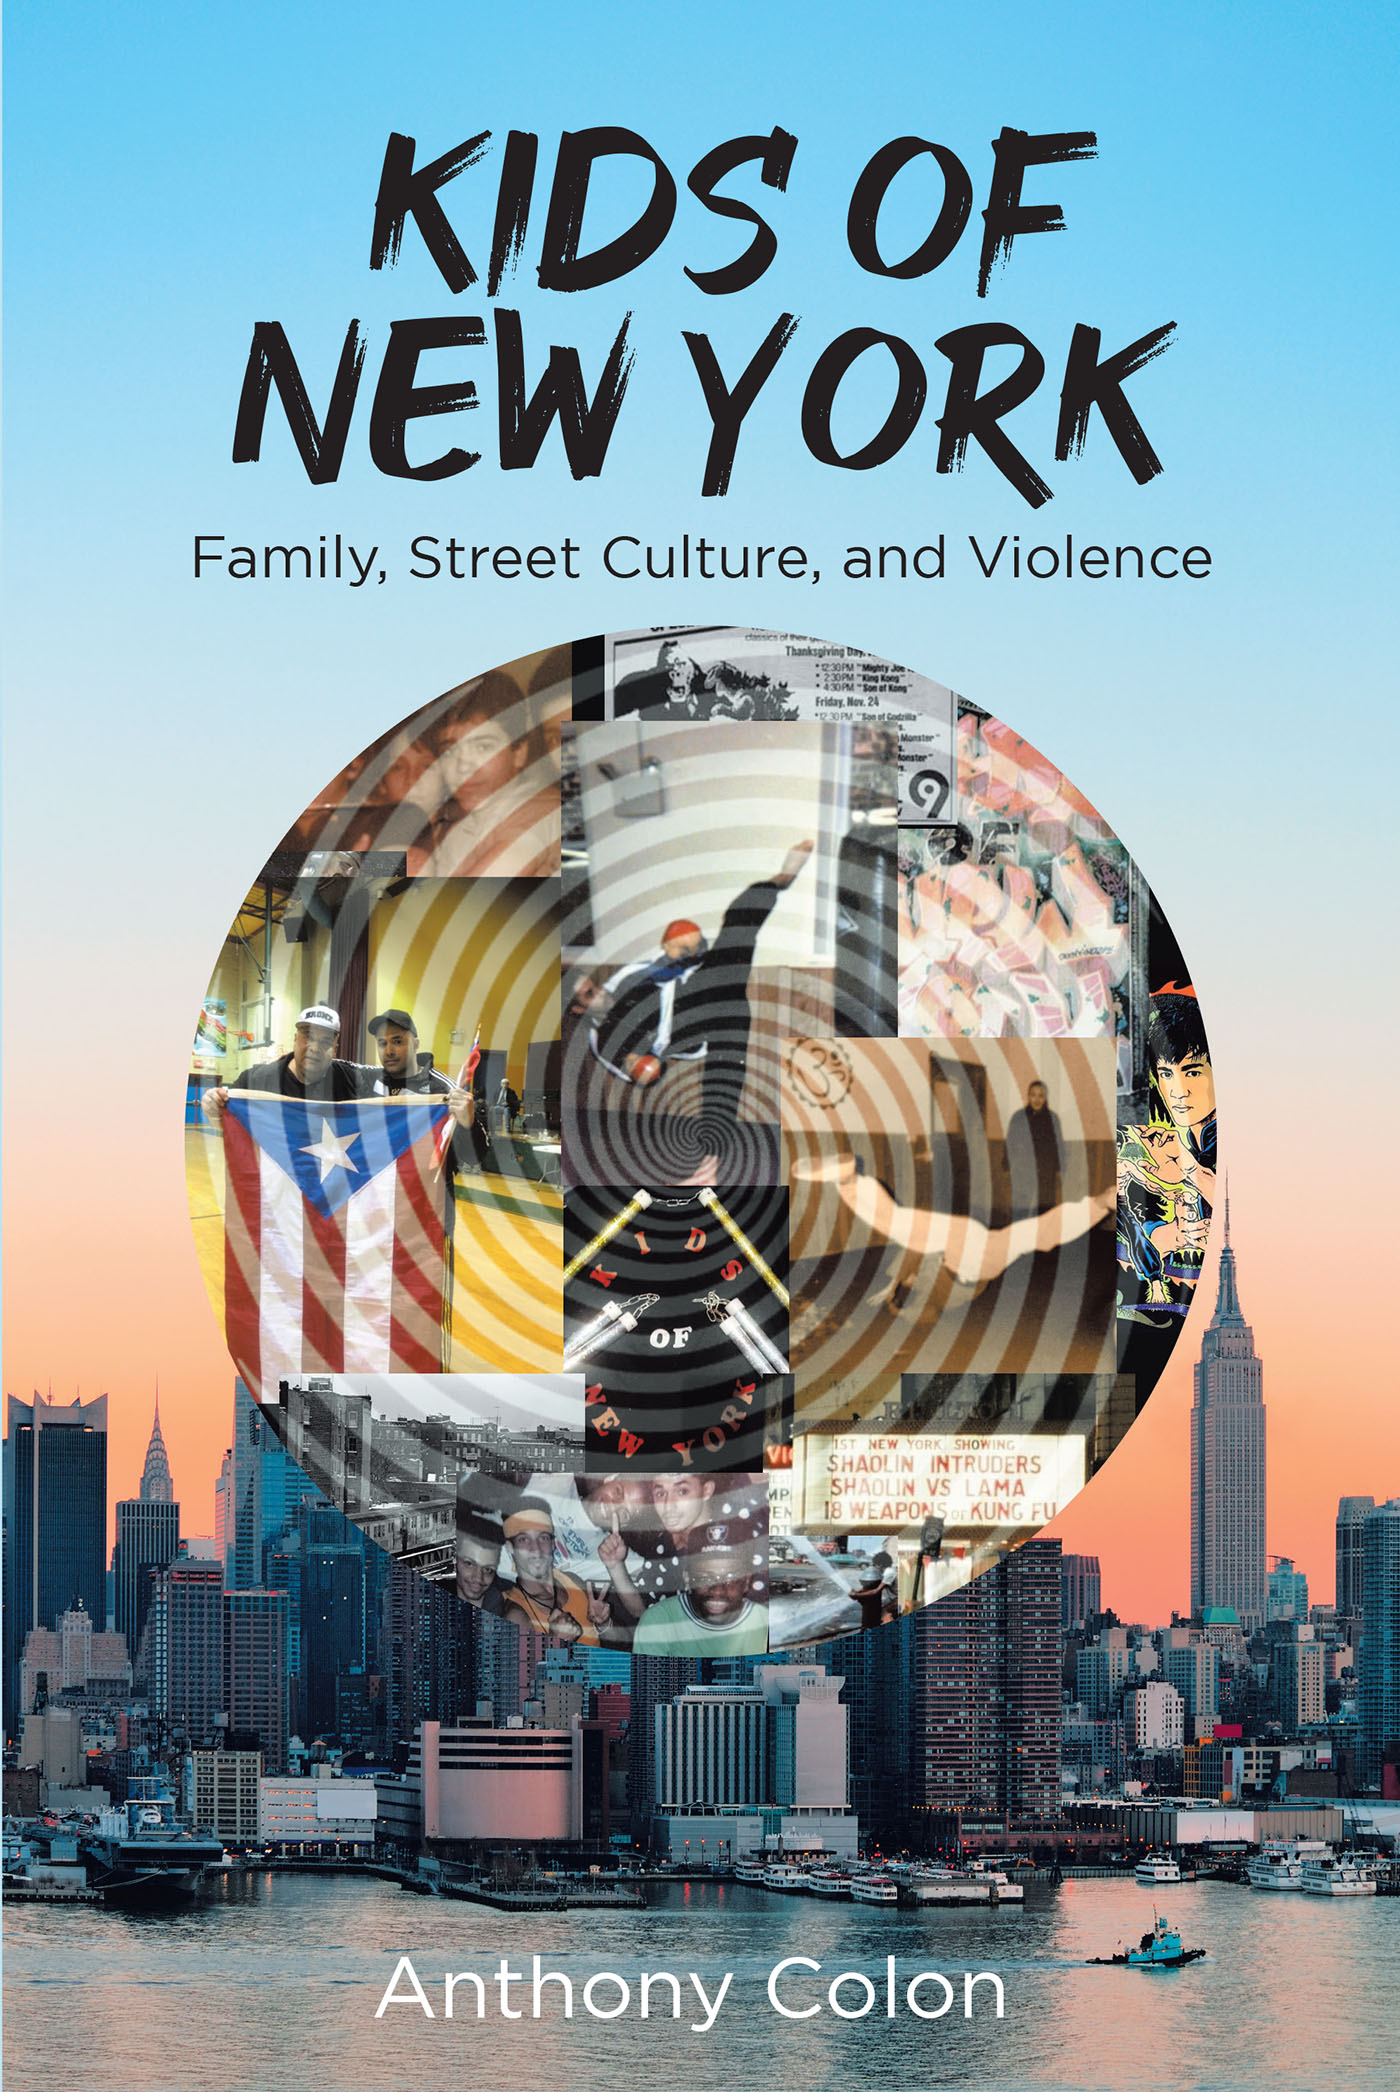 Author Anthony Colon’s New Book, "Kids of New York: Family, Street Culture, and Violence," is a Deeply Personal Reflection in His Formative Years in the South Bronx